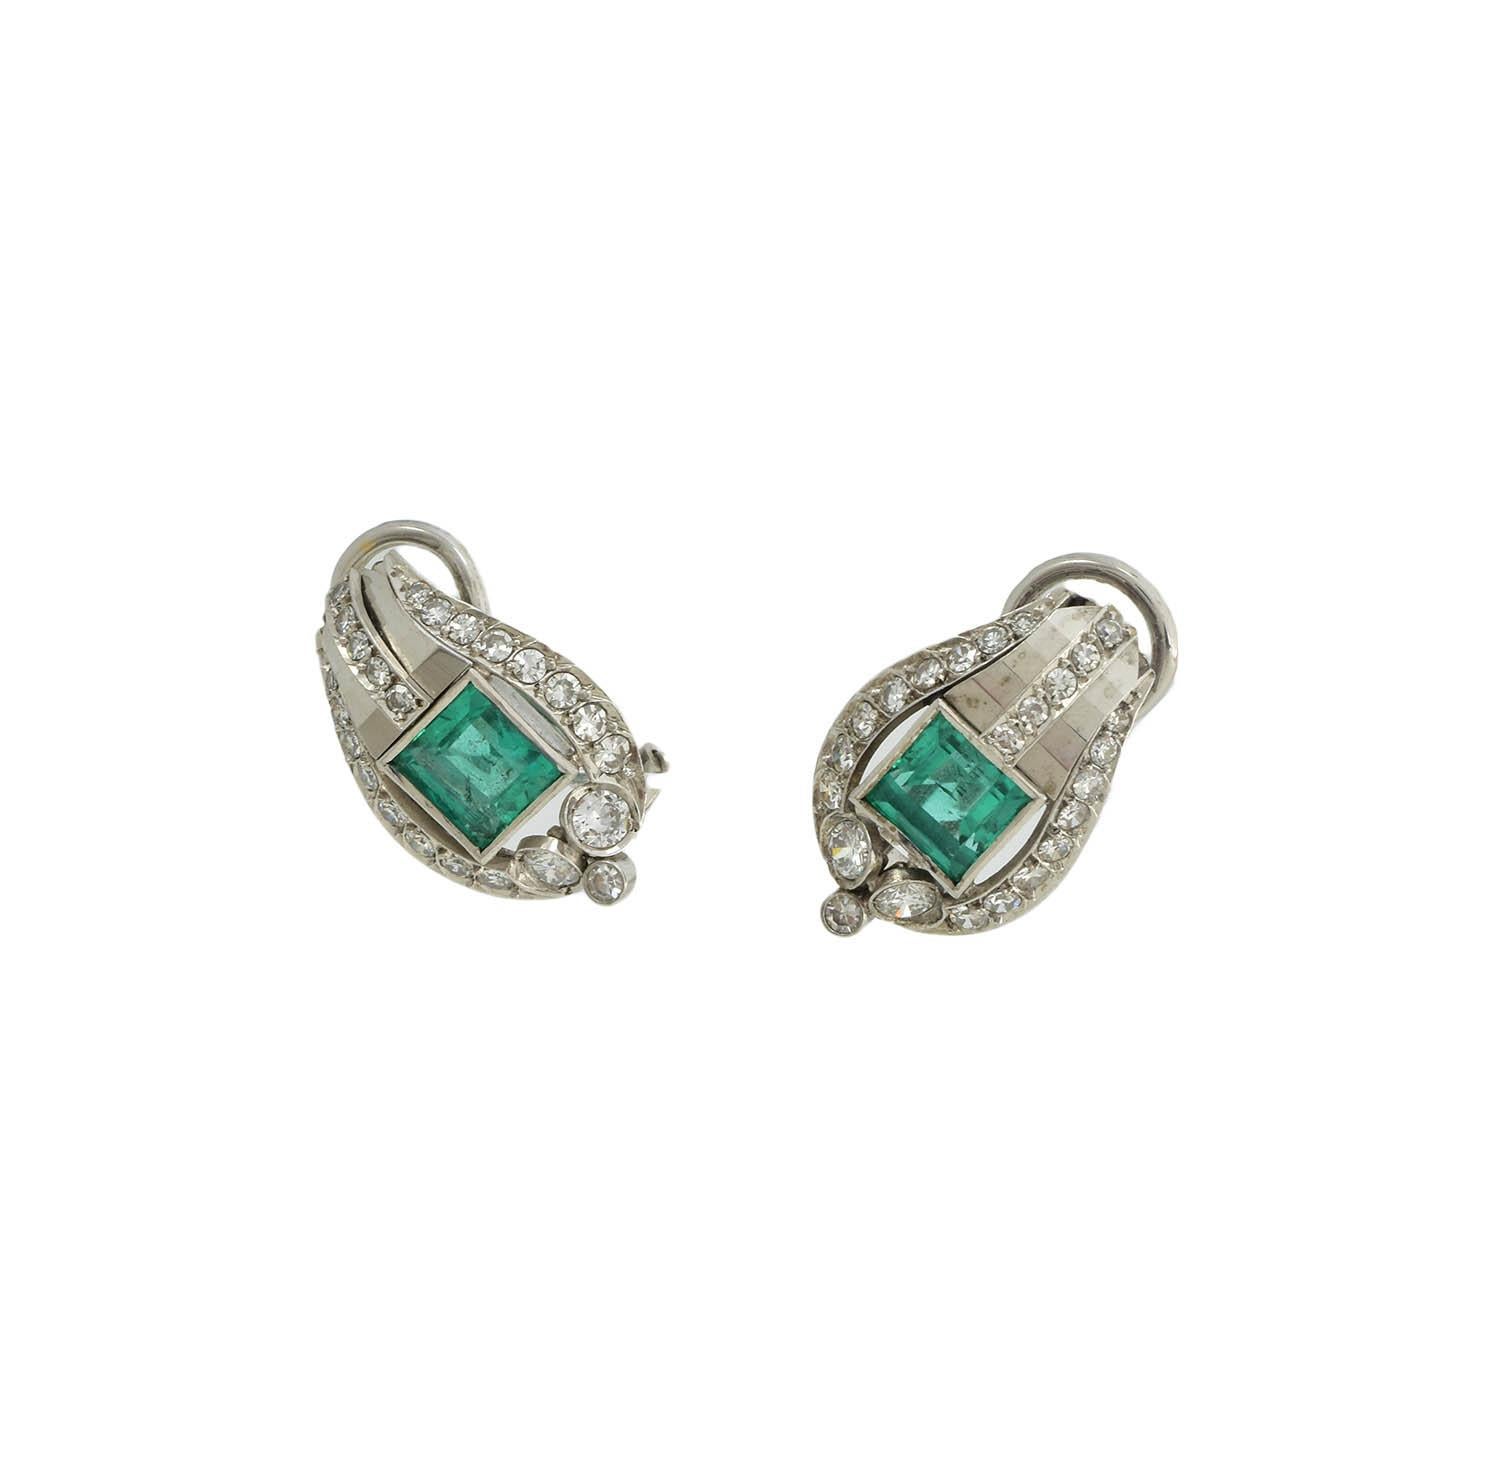 Type: Clip earrings

Metal: Platinum

Stones: 24 Brilliant cut round diamonds (each earring)

Emerald Weight: Approx. 4 CTW

Total Item Weight (g): 9.8 grams

Approximate Diameter: 19.48mm (height) 14.1 (width)

Closure: Clip